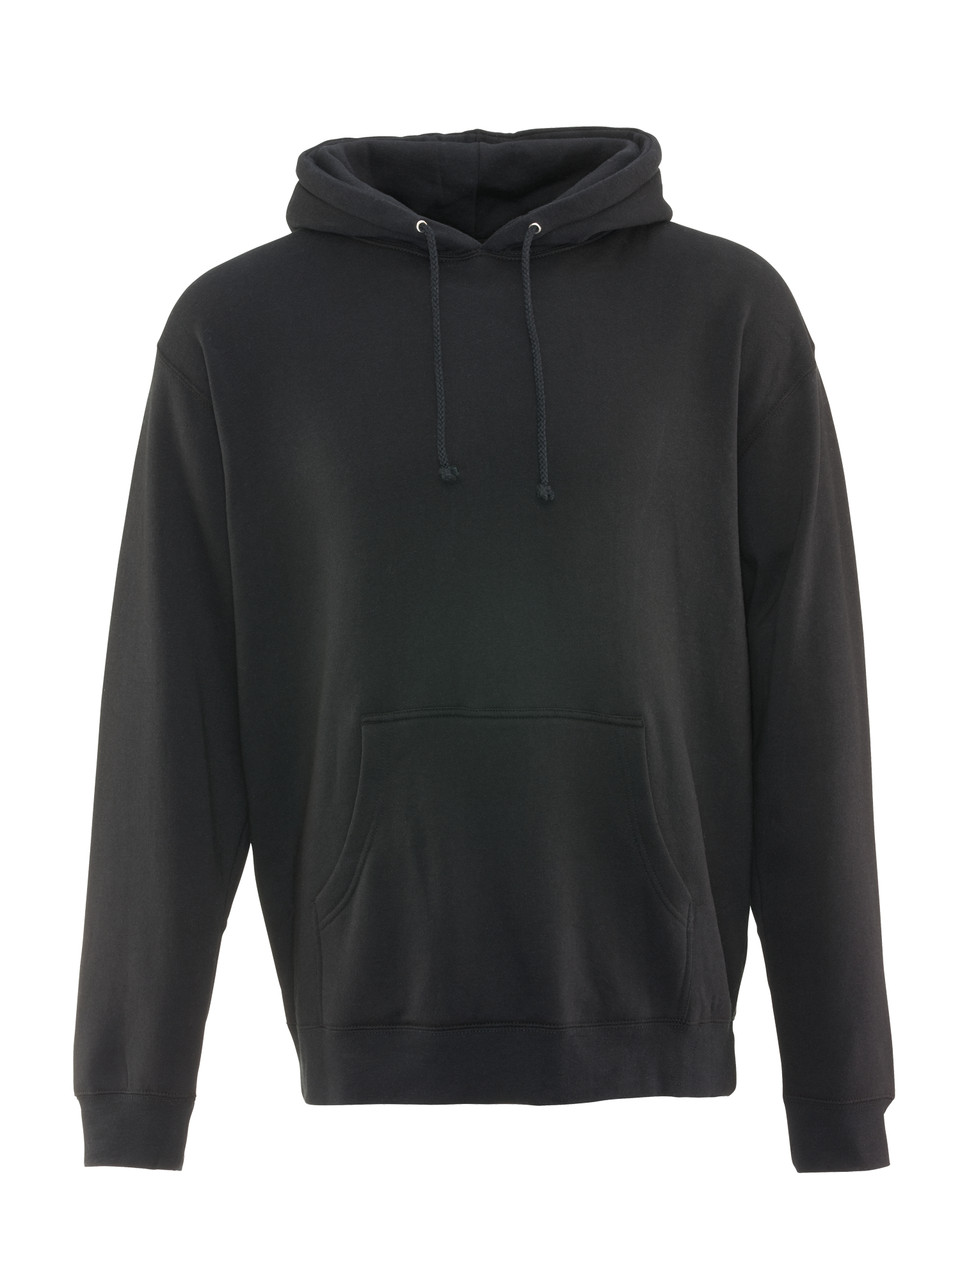 Black hooded super extra warm total look